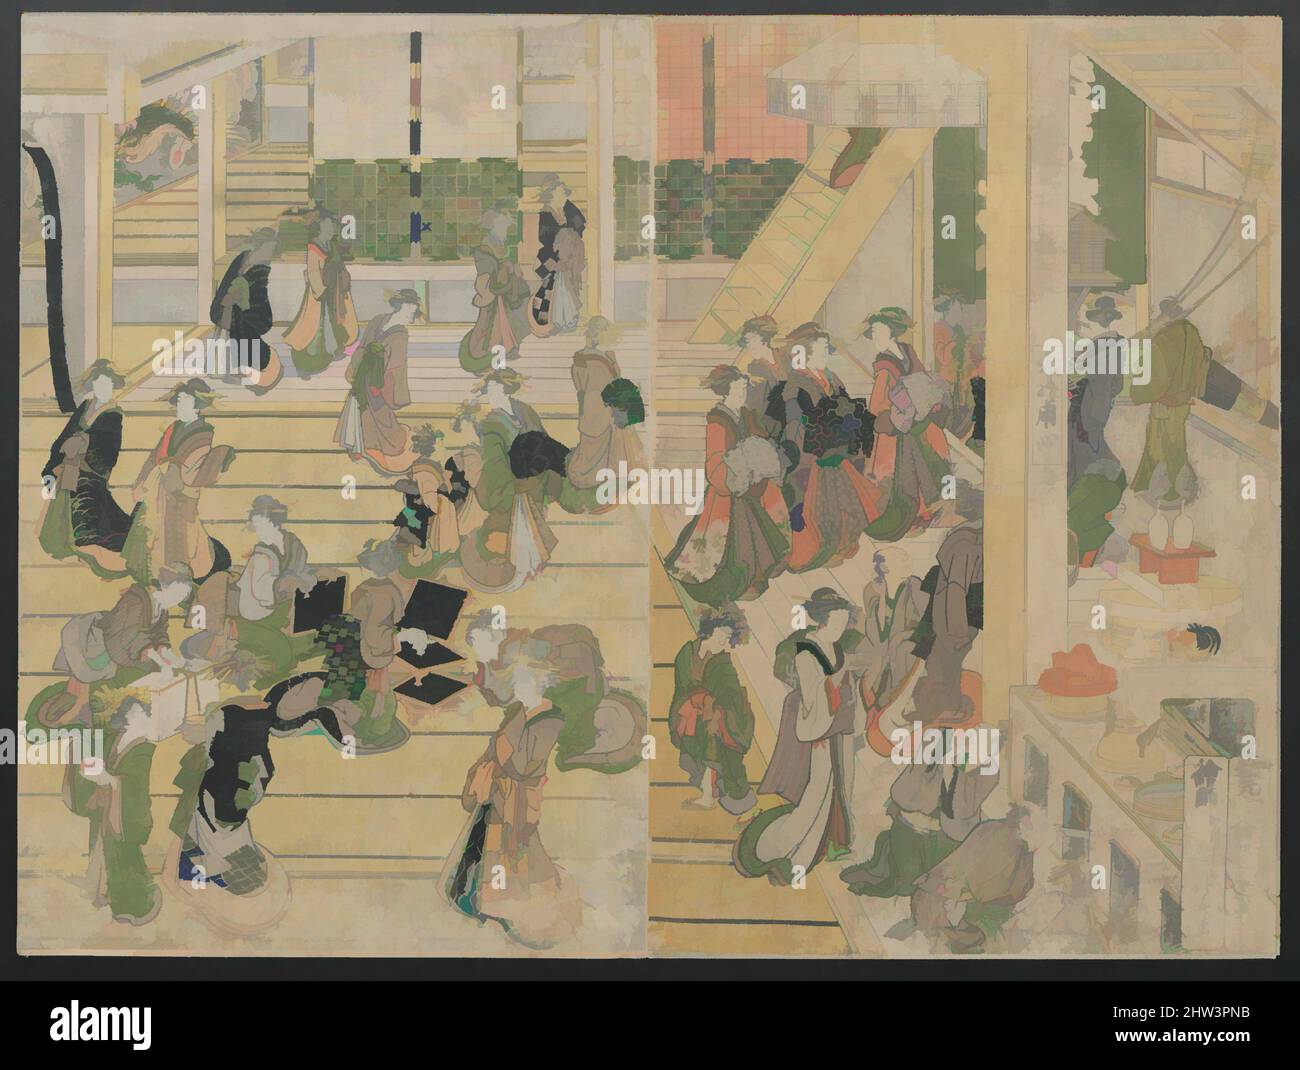 Art inspired by New Year's Day at the Ogiya Seiro, Edo period (1615–1868), ca. 1804, Japan, Pentaptych of polychrome woodblock prints, 14 1/2 x 48 1/2 in. (36.8 x 123.2 cm), Illustrated Books, Katsushika Hokusai (Japanese, Tokyo (Edo) 1760–1849 Tokyo (Edo, Classic works modernized by Artotop with a splash of modernity. Shapes, color and value, eye-catching visual impact on art. Emotions through freedom of artworks in a contemporary way. A timeless message pursuing a wildly creative new direction. Artists turning to the digital medium and creating the Artotop NFT Stock Photo